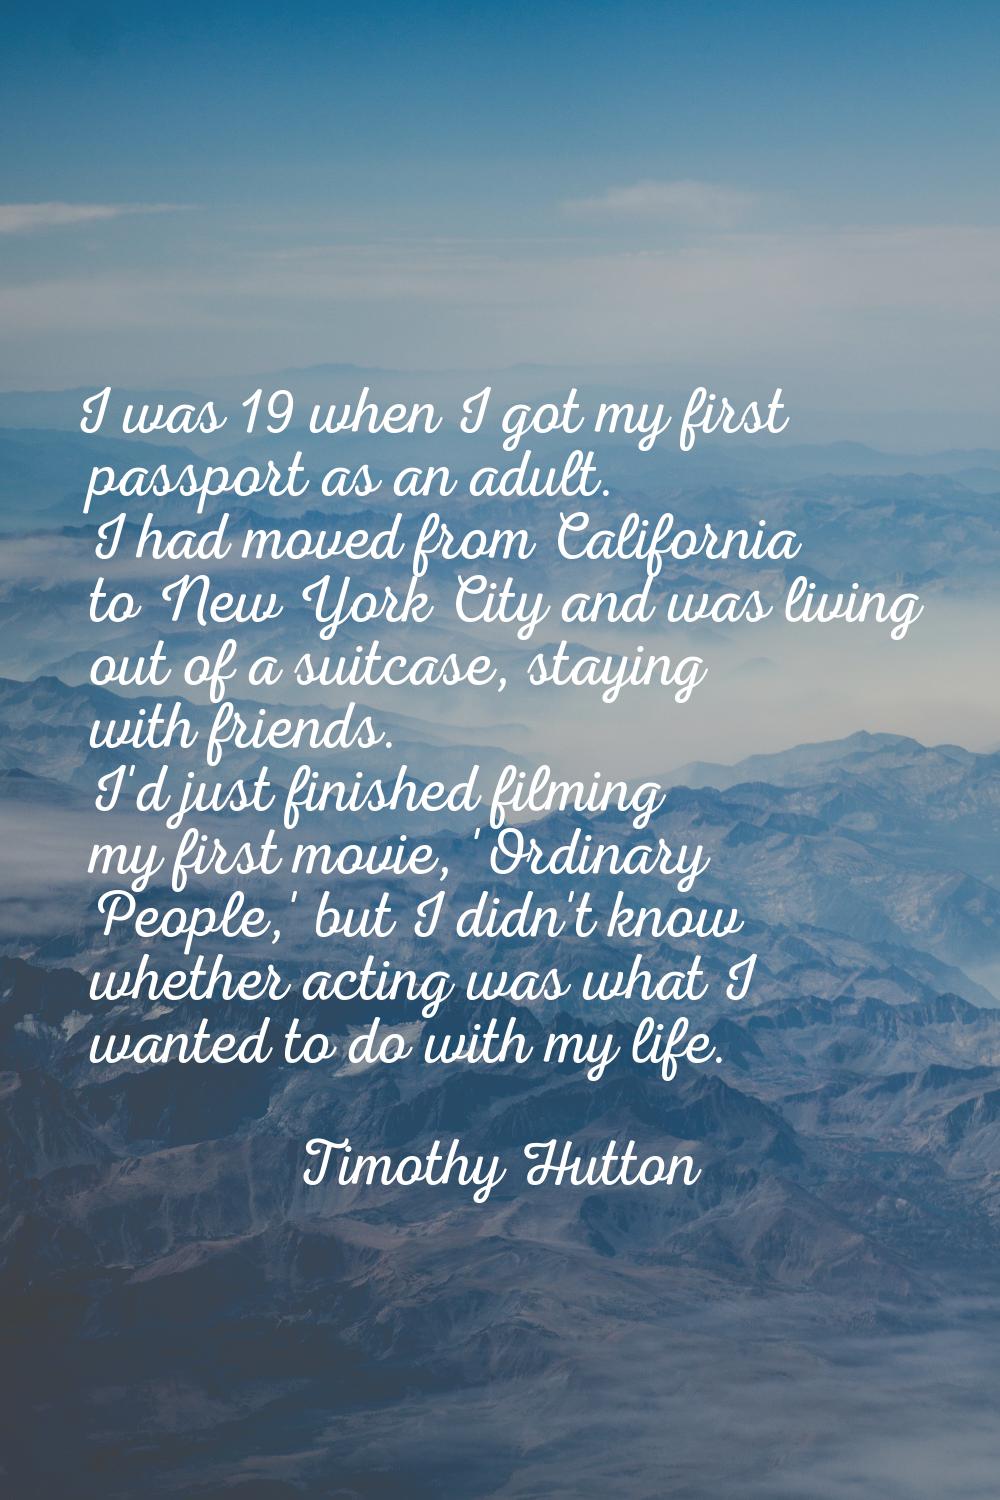 I was 19 when I got my first passport as an adult. I had moved from California to New York City and